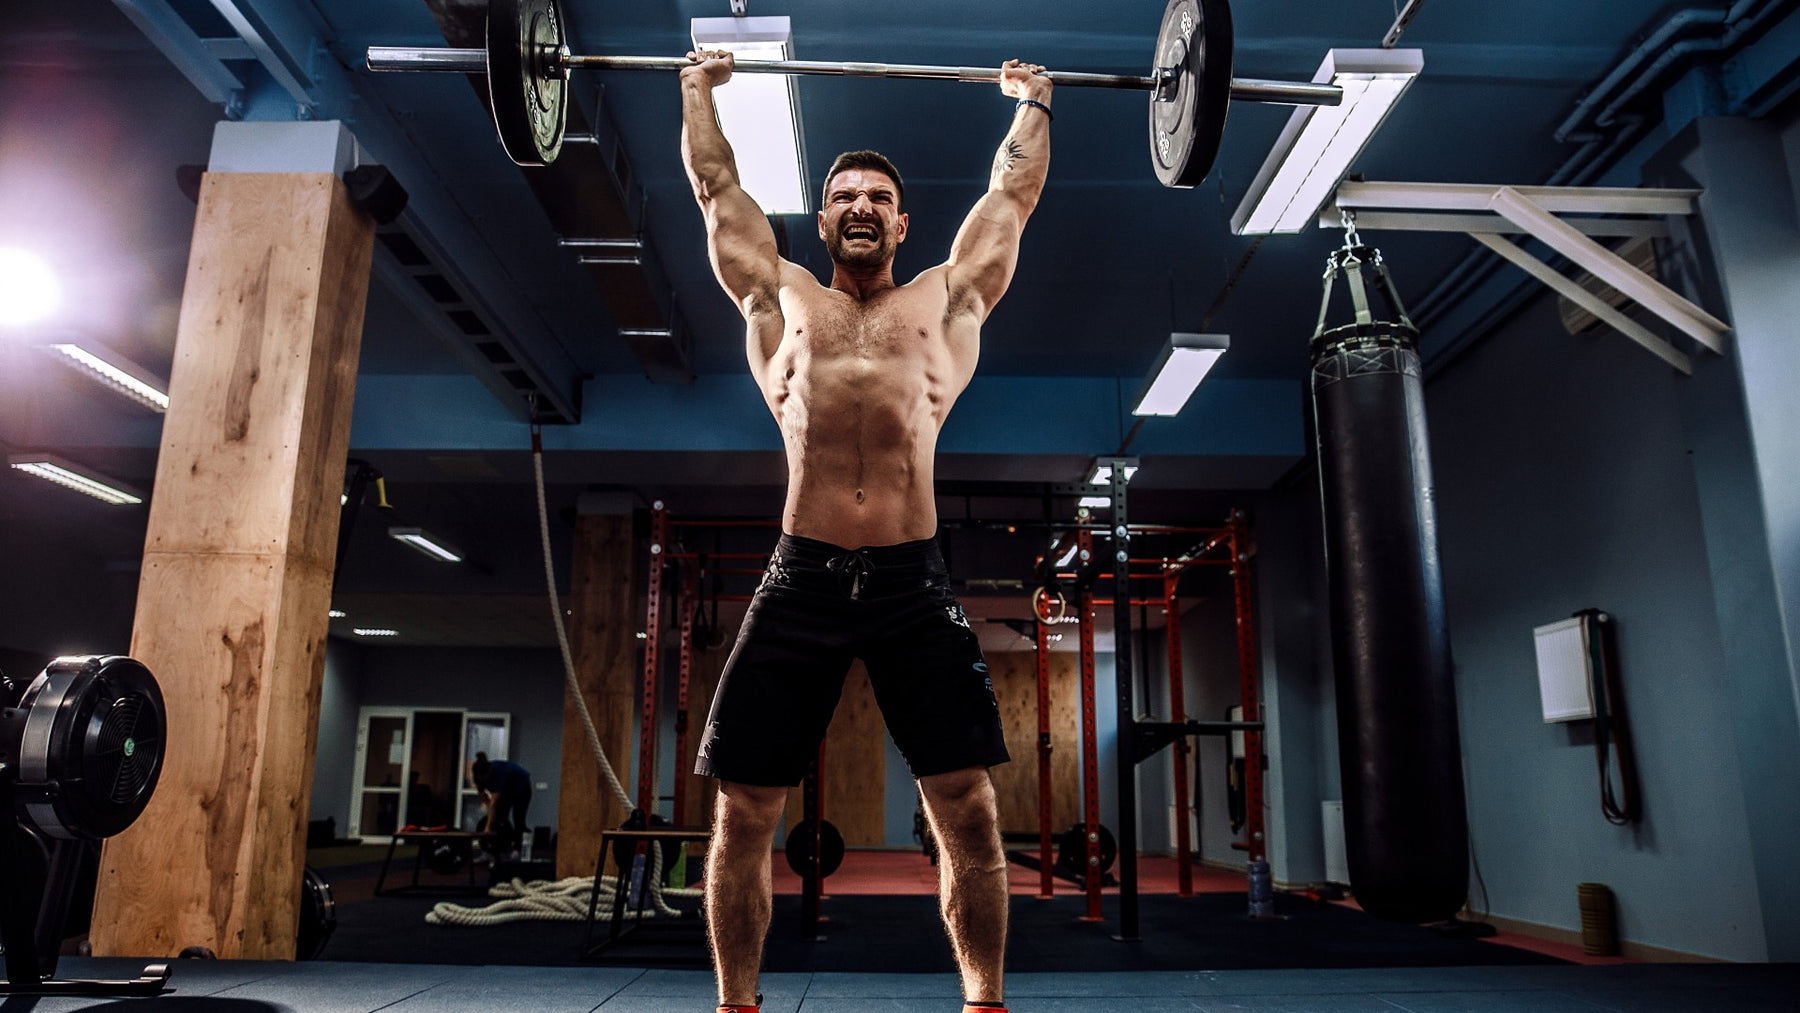 Use Barbell Complexes to Burn Fat and Build Muscle